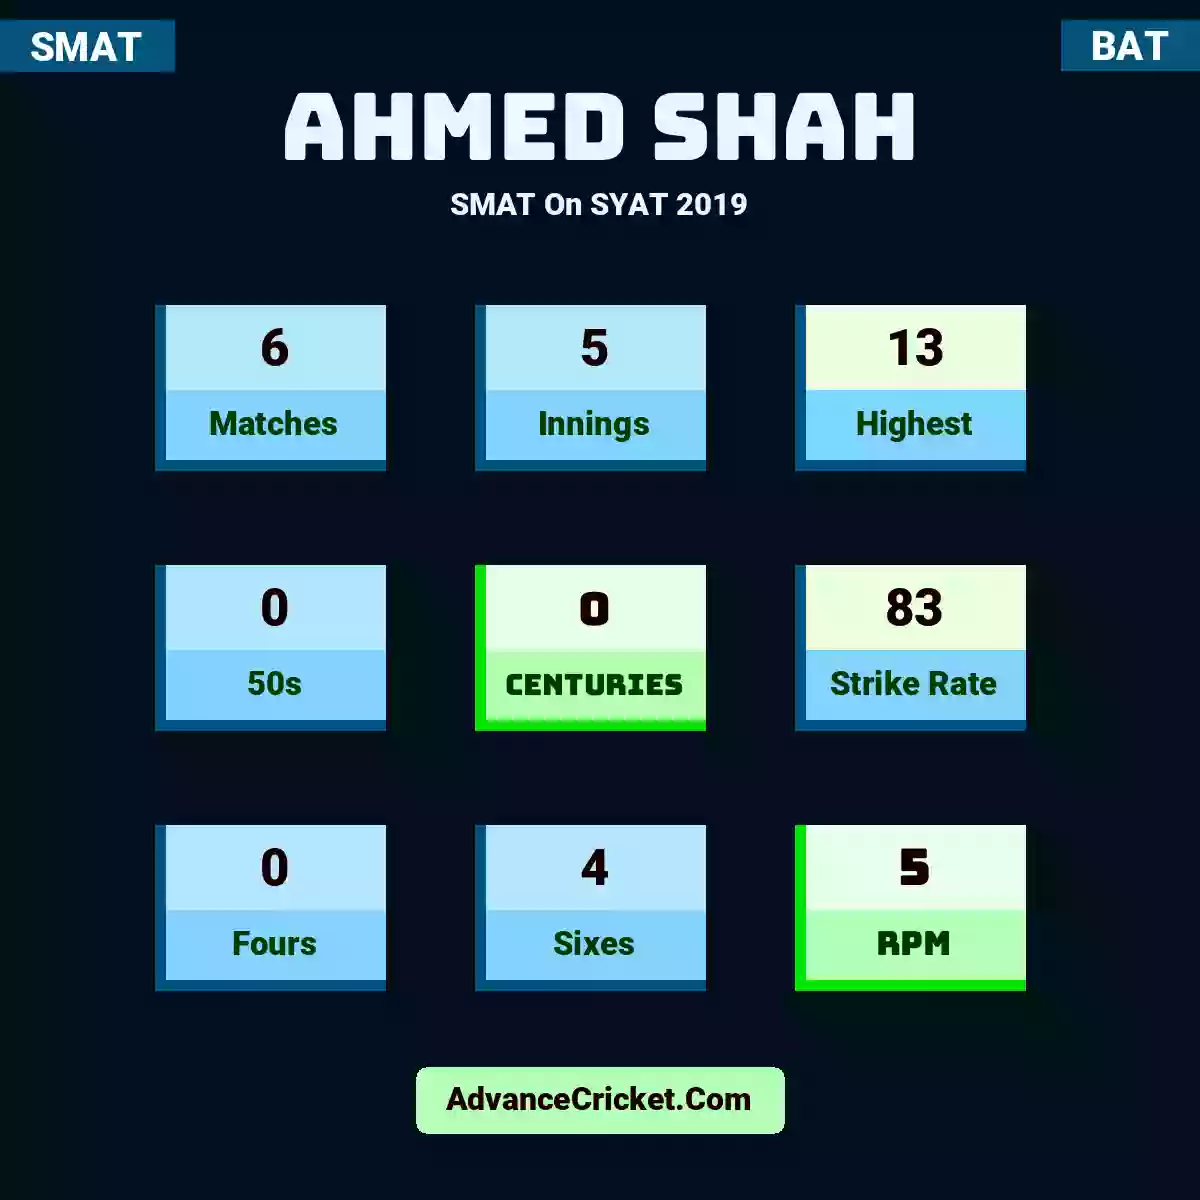 Ahmed Shah SMAT  On SYAT 2019, Ahmed Shah played 6 matches, scored 13 runs as highest, 0 half-centuries, and 0 centuries, with a strike rate of 83. A.Shah hit 0 fours and 4 sixes, with an RPM of 5.